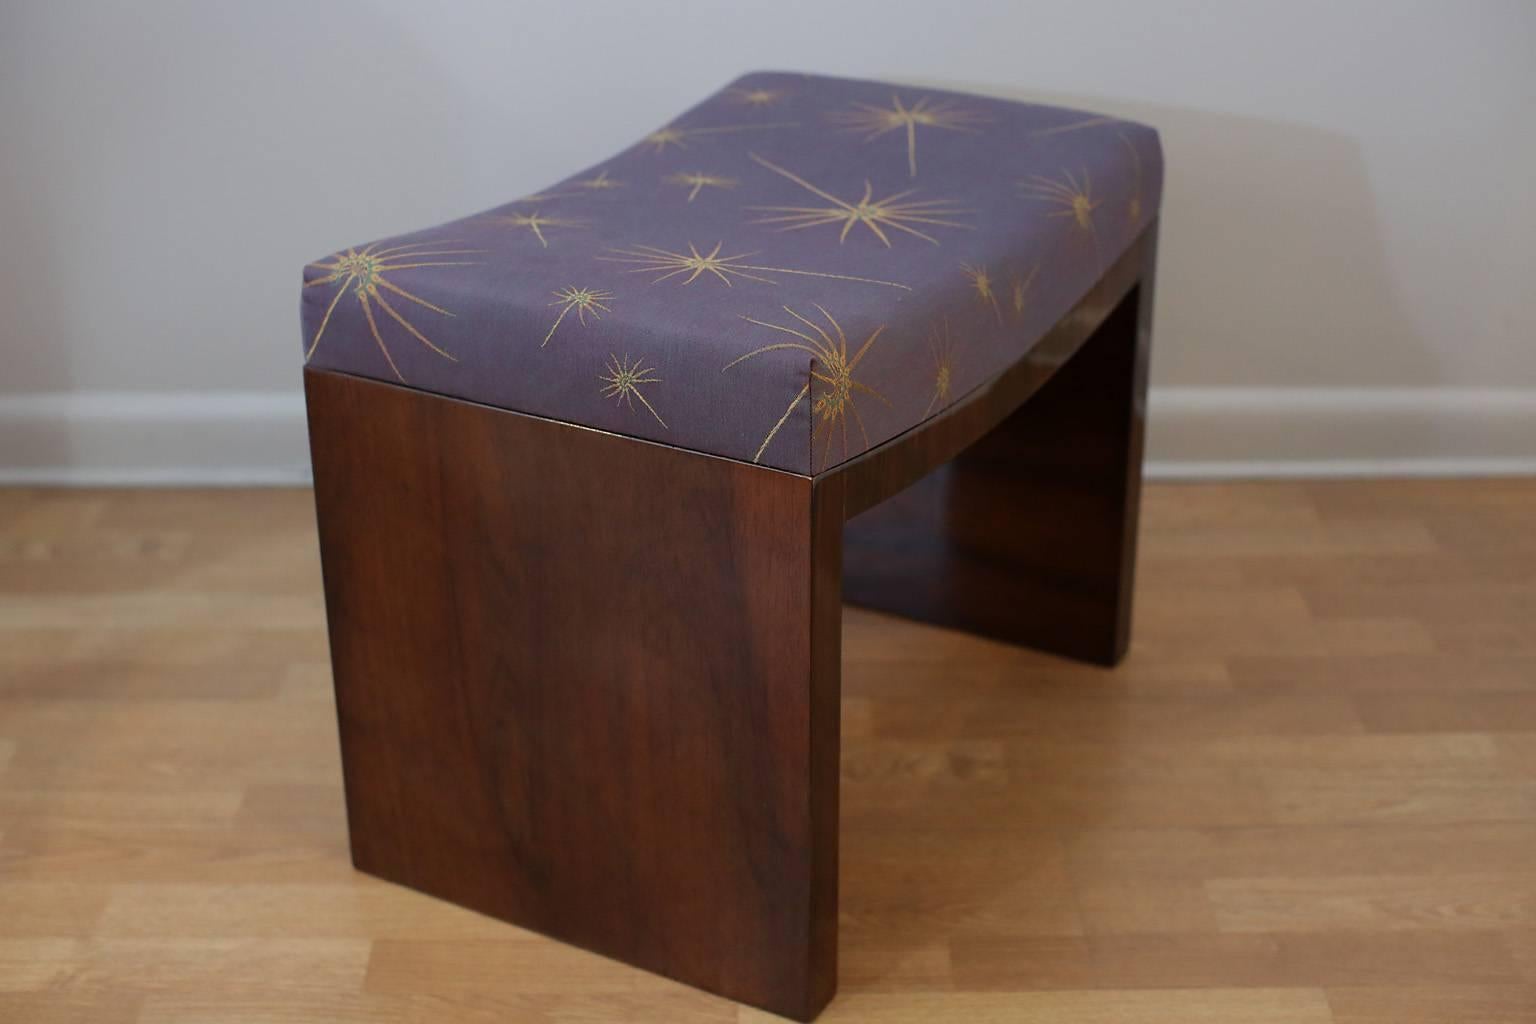 Art Deco pouf or bench with Macassar ebony front and back. Walnut sides. Vintage fabric upholstery.